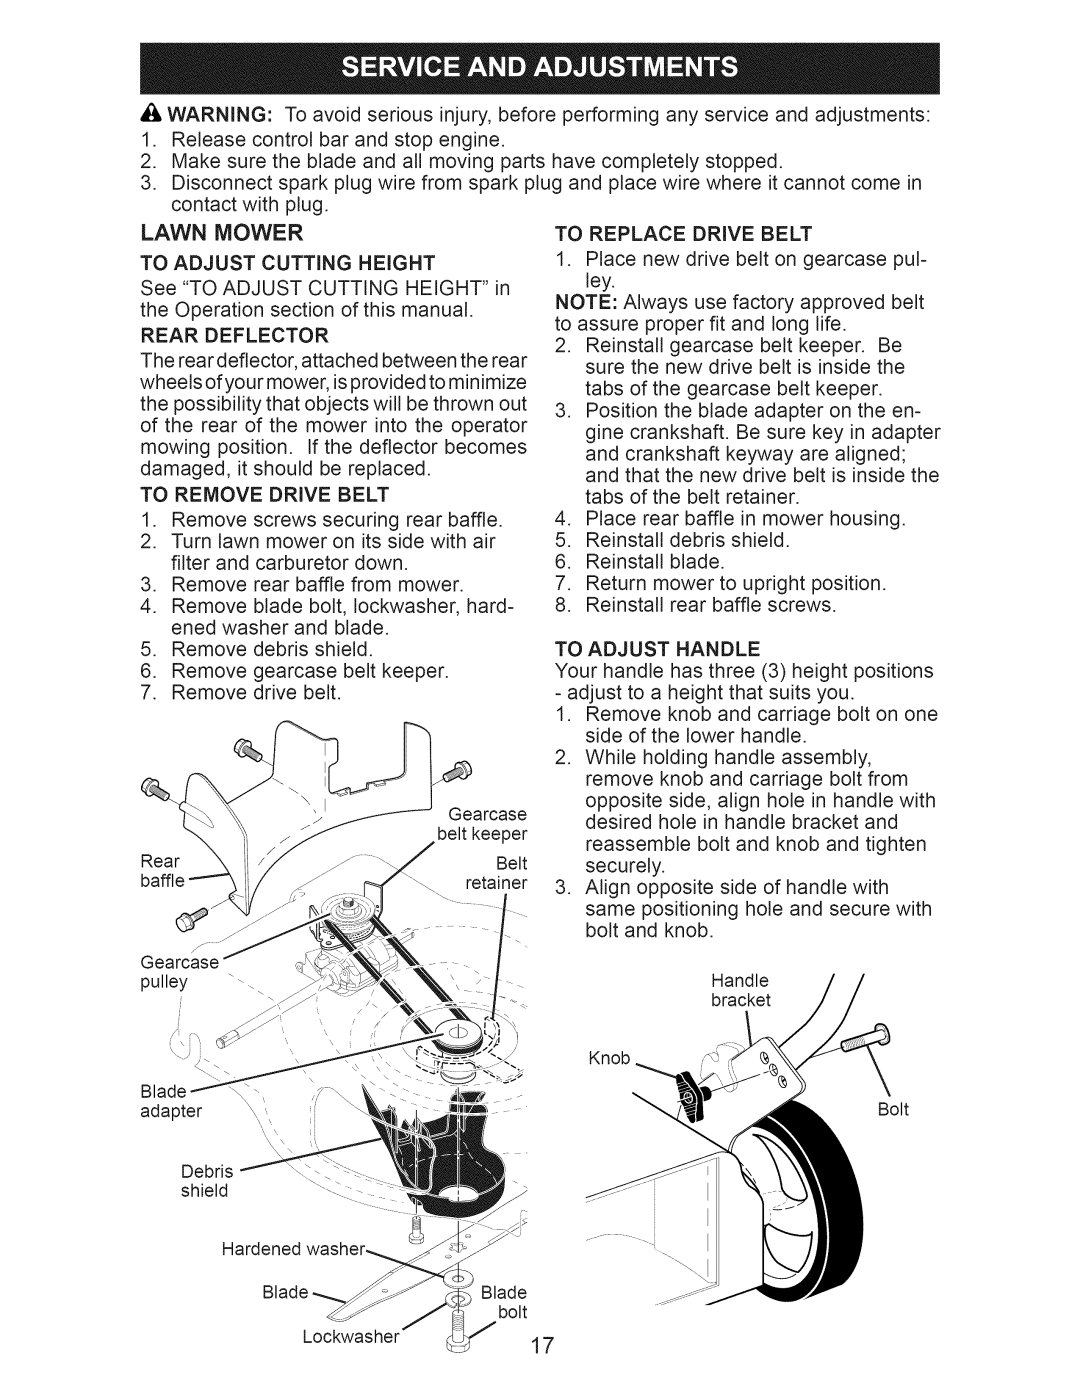 Craftsman 917.374101 manual contact with plug, Lawn Mower 